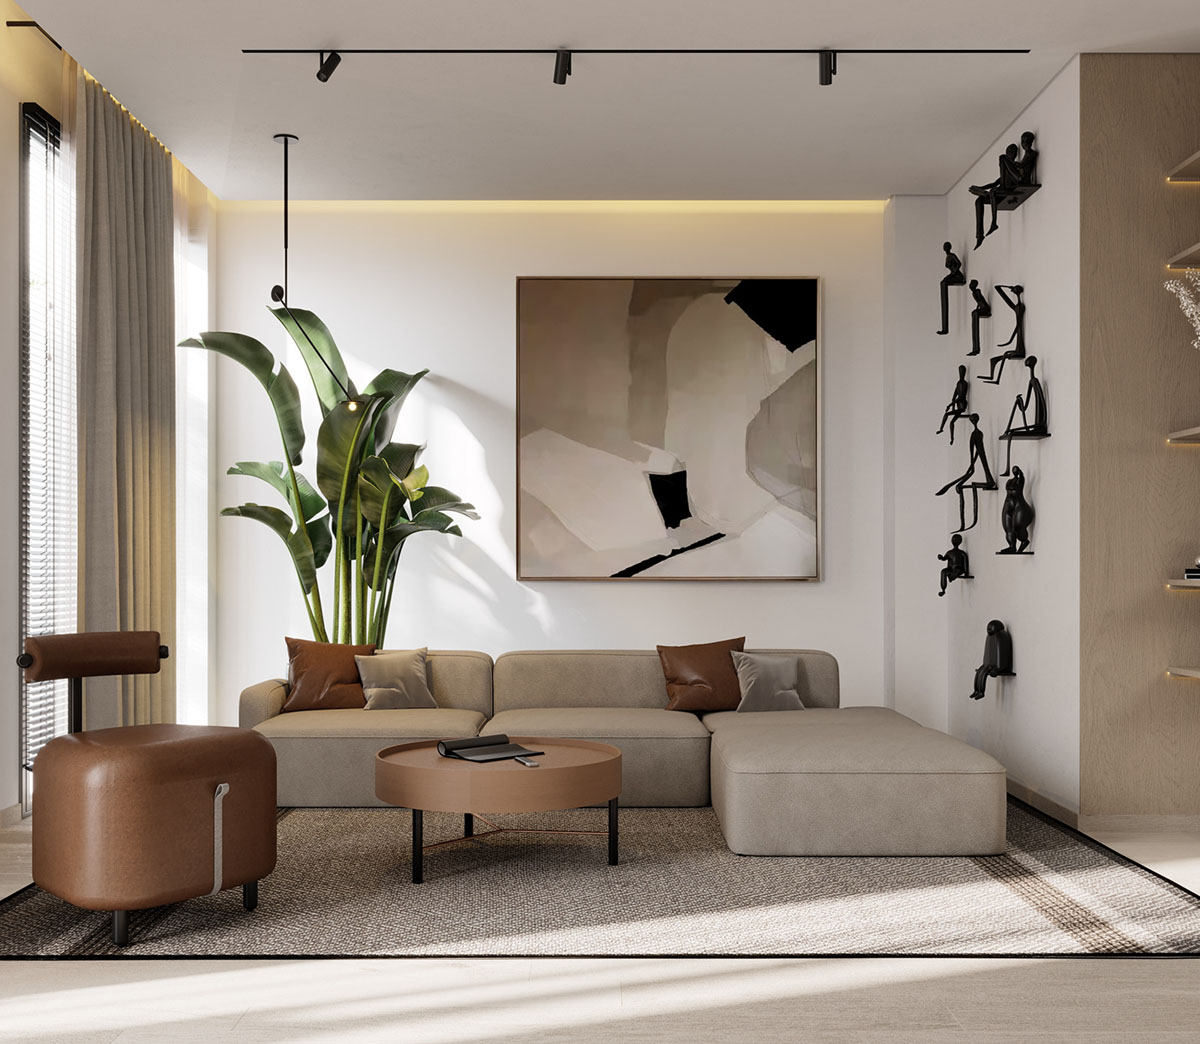 Elegant Beige And Brown Interiors With Modern Flair thumbnail